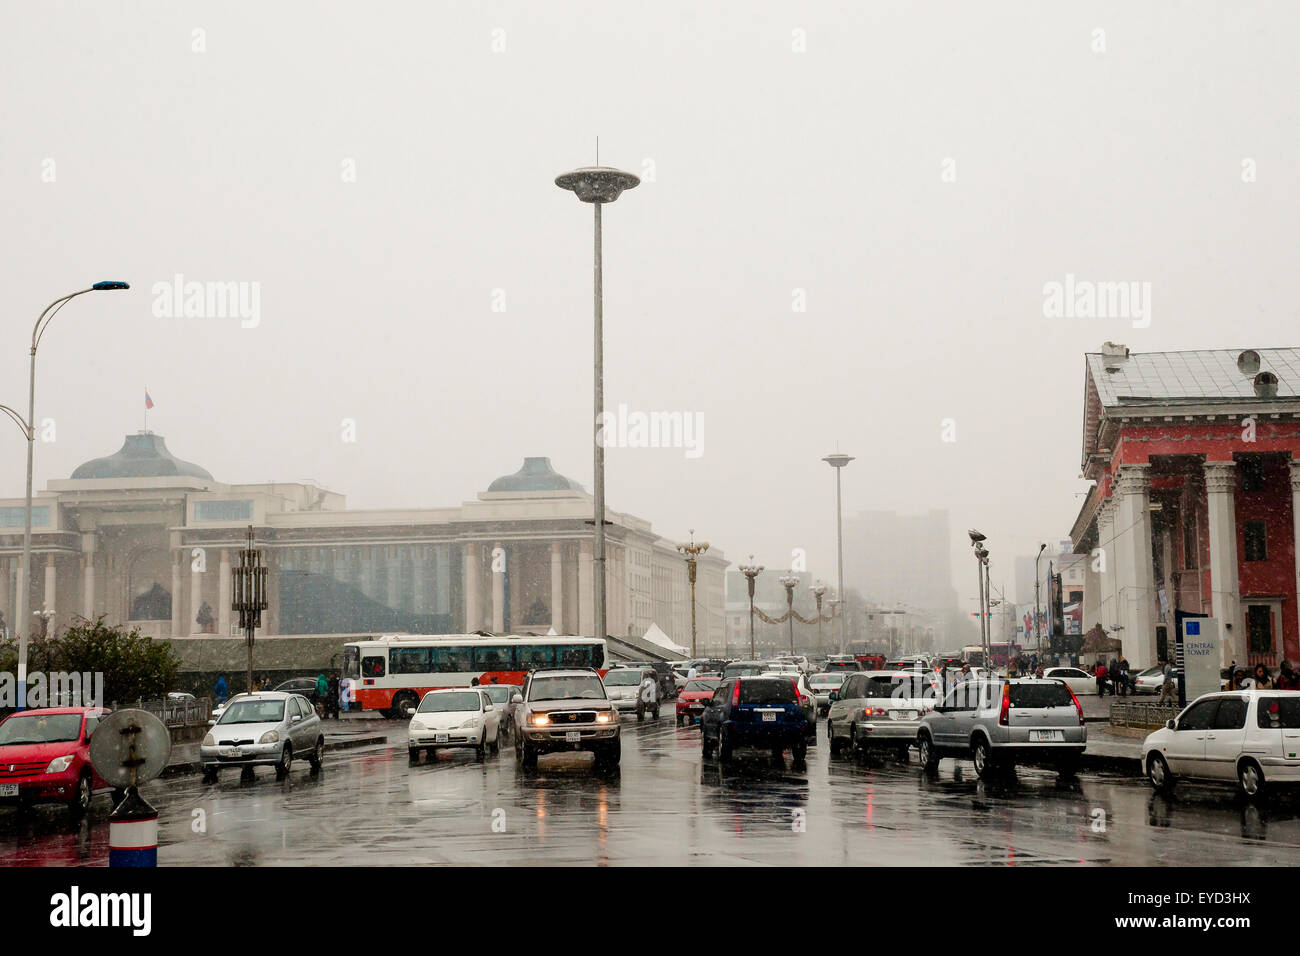 Daily traffic on Olympic Street on a snowy day in the capital city - Ulaanbaatar - Mongolia Stock Photo